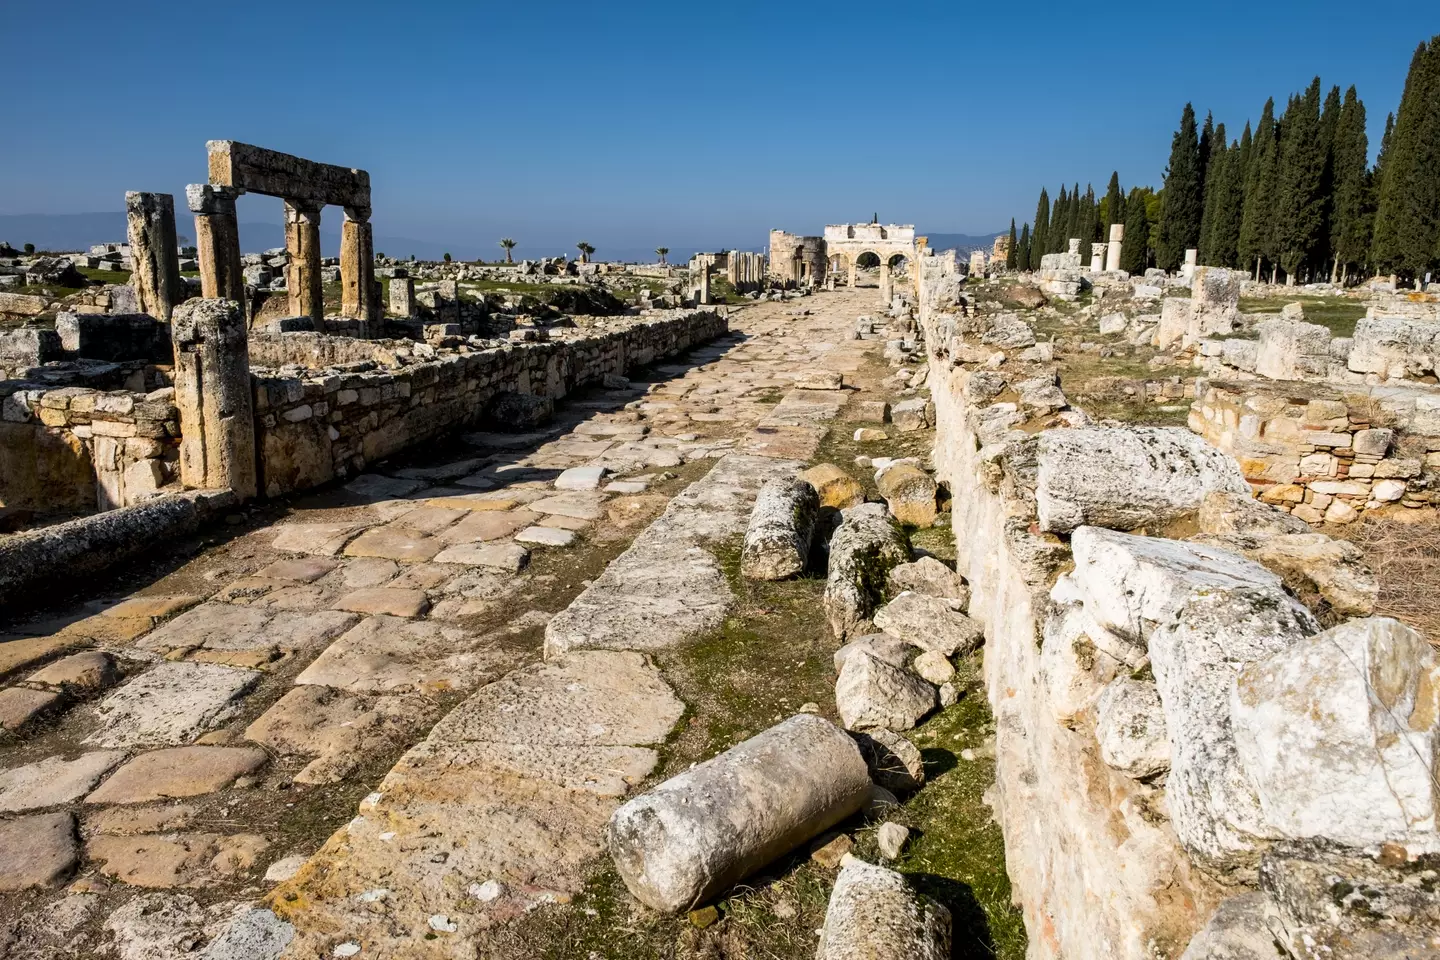 The ancient Greek city dates back to the second century.